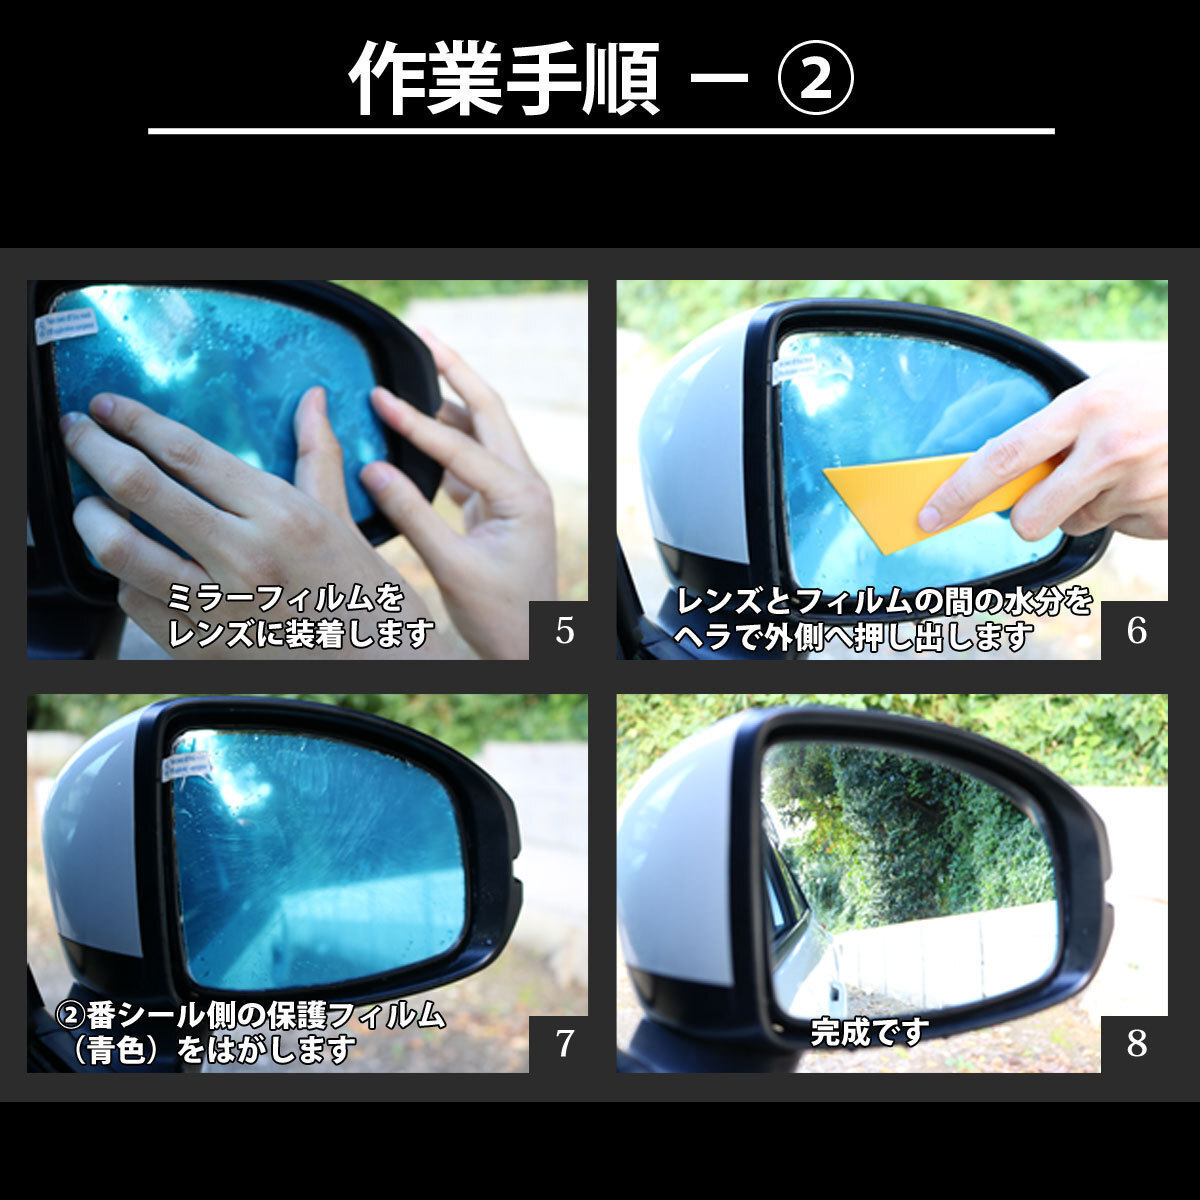  postage 185 jpy car make exclusive use Benz W124 1985~1995/09 right steering wheel car exclusive use water-repellent door mirror film left right set water-repellent effect 6 months shipping deadline 18 hour 